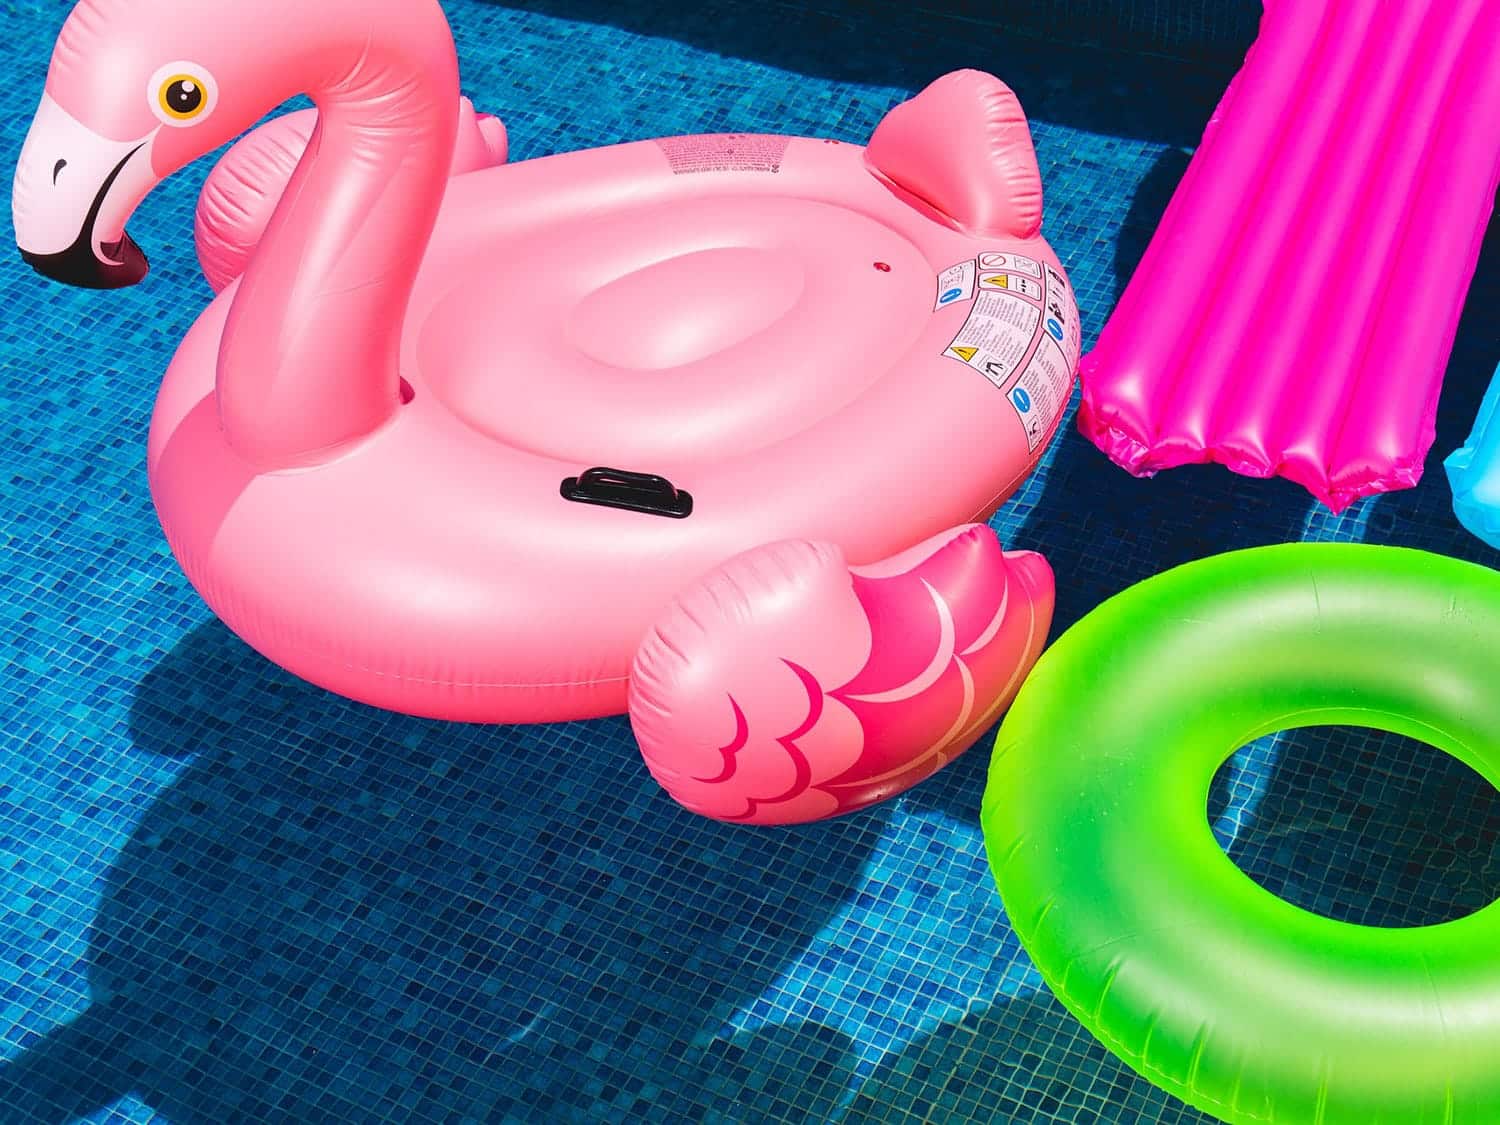 Pool floats in a swimming pool.